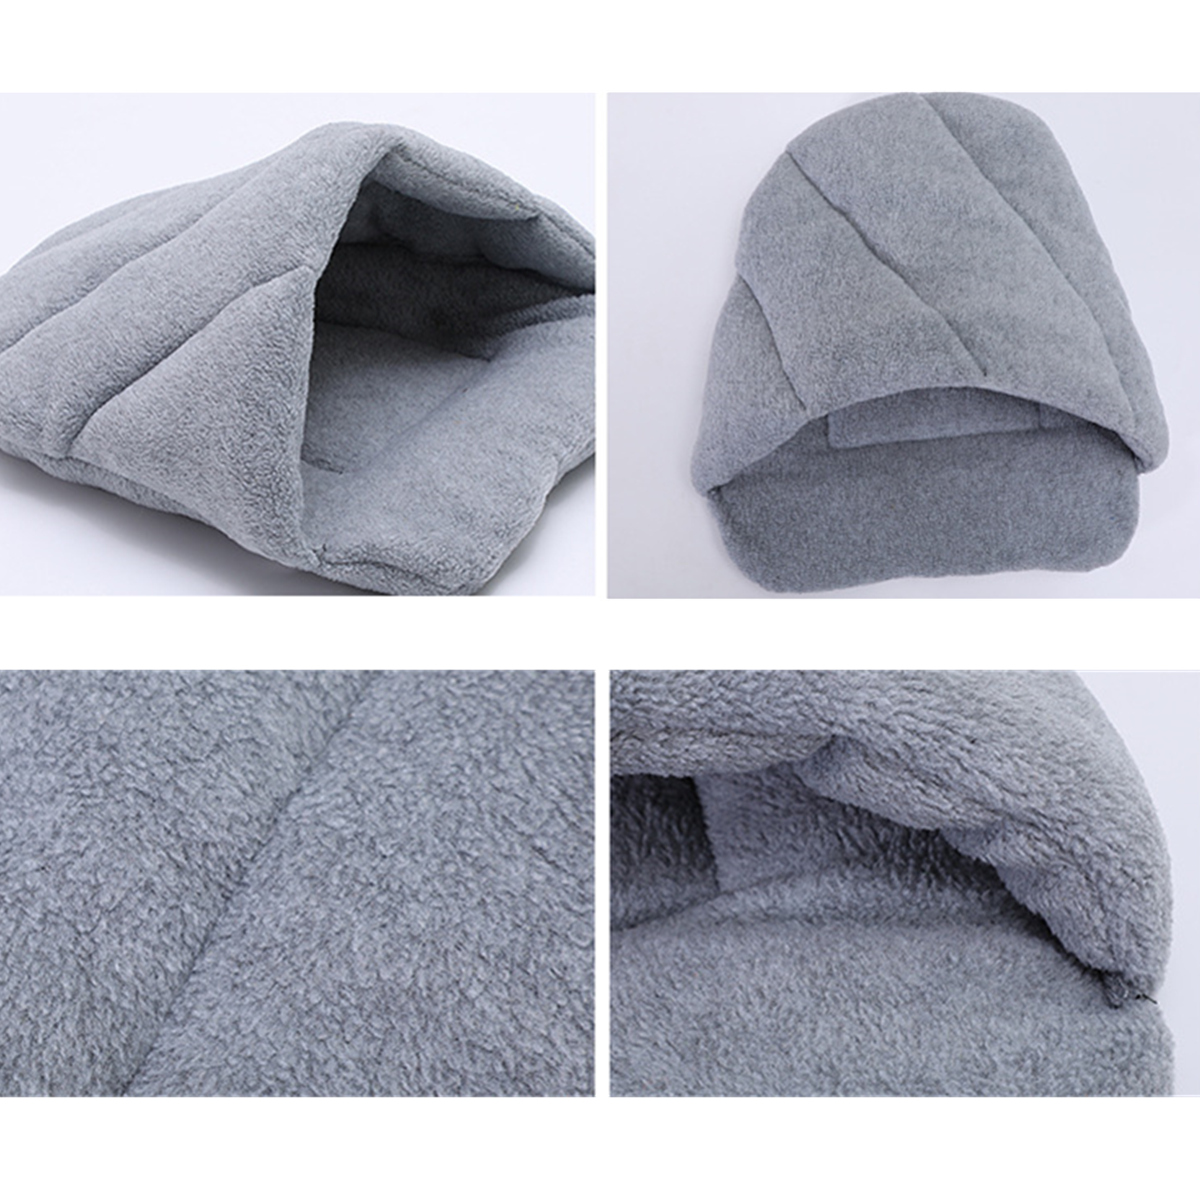 Pet-Cat-Dog-House-Kennel-Puppy-Cave-Sleeping-Bed-Super-Soft-Mat-Pad-Warm-Nest-1363191-4